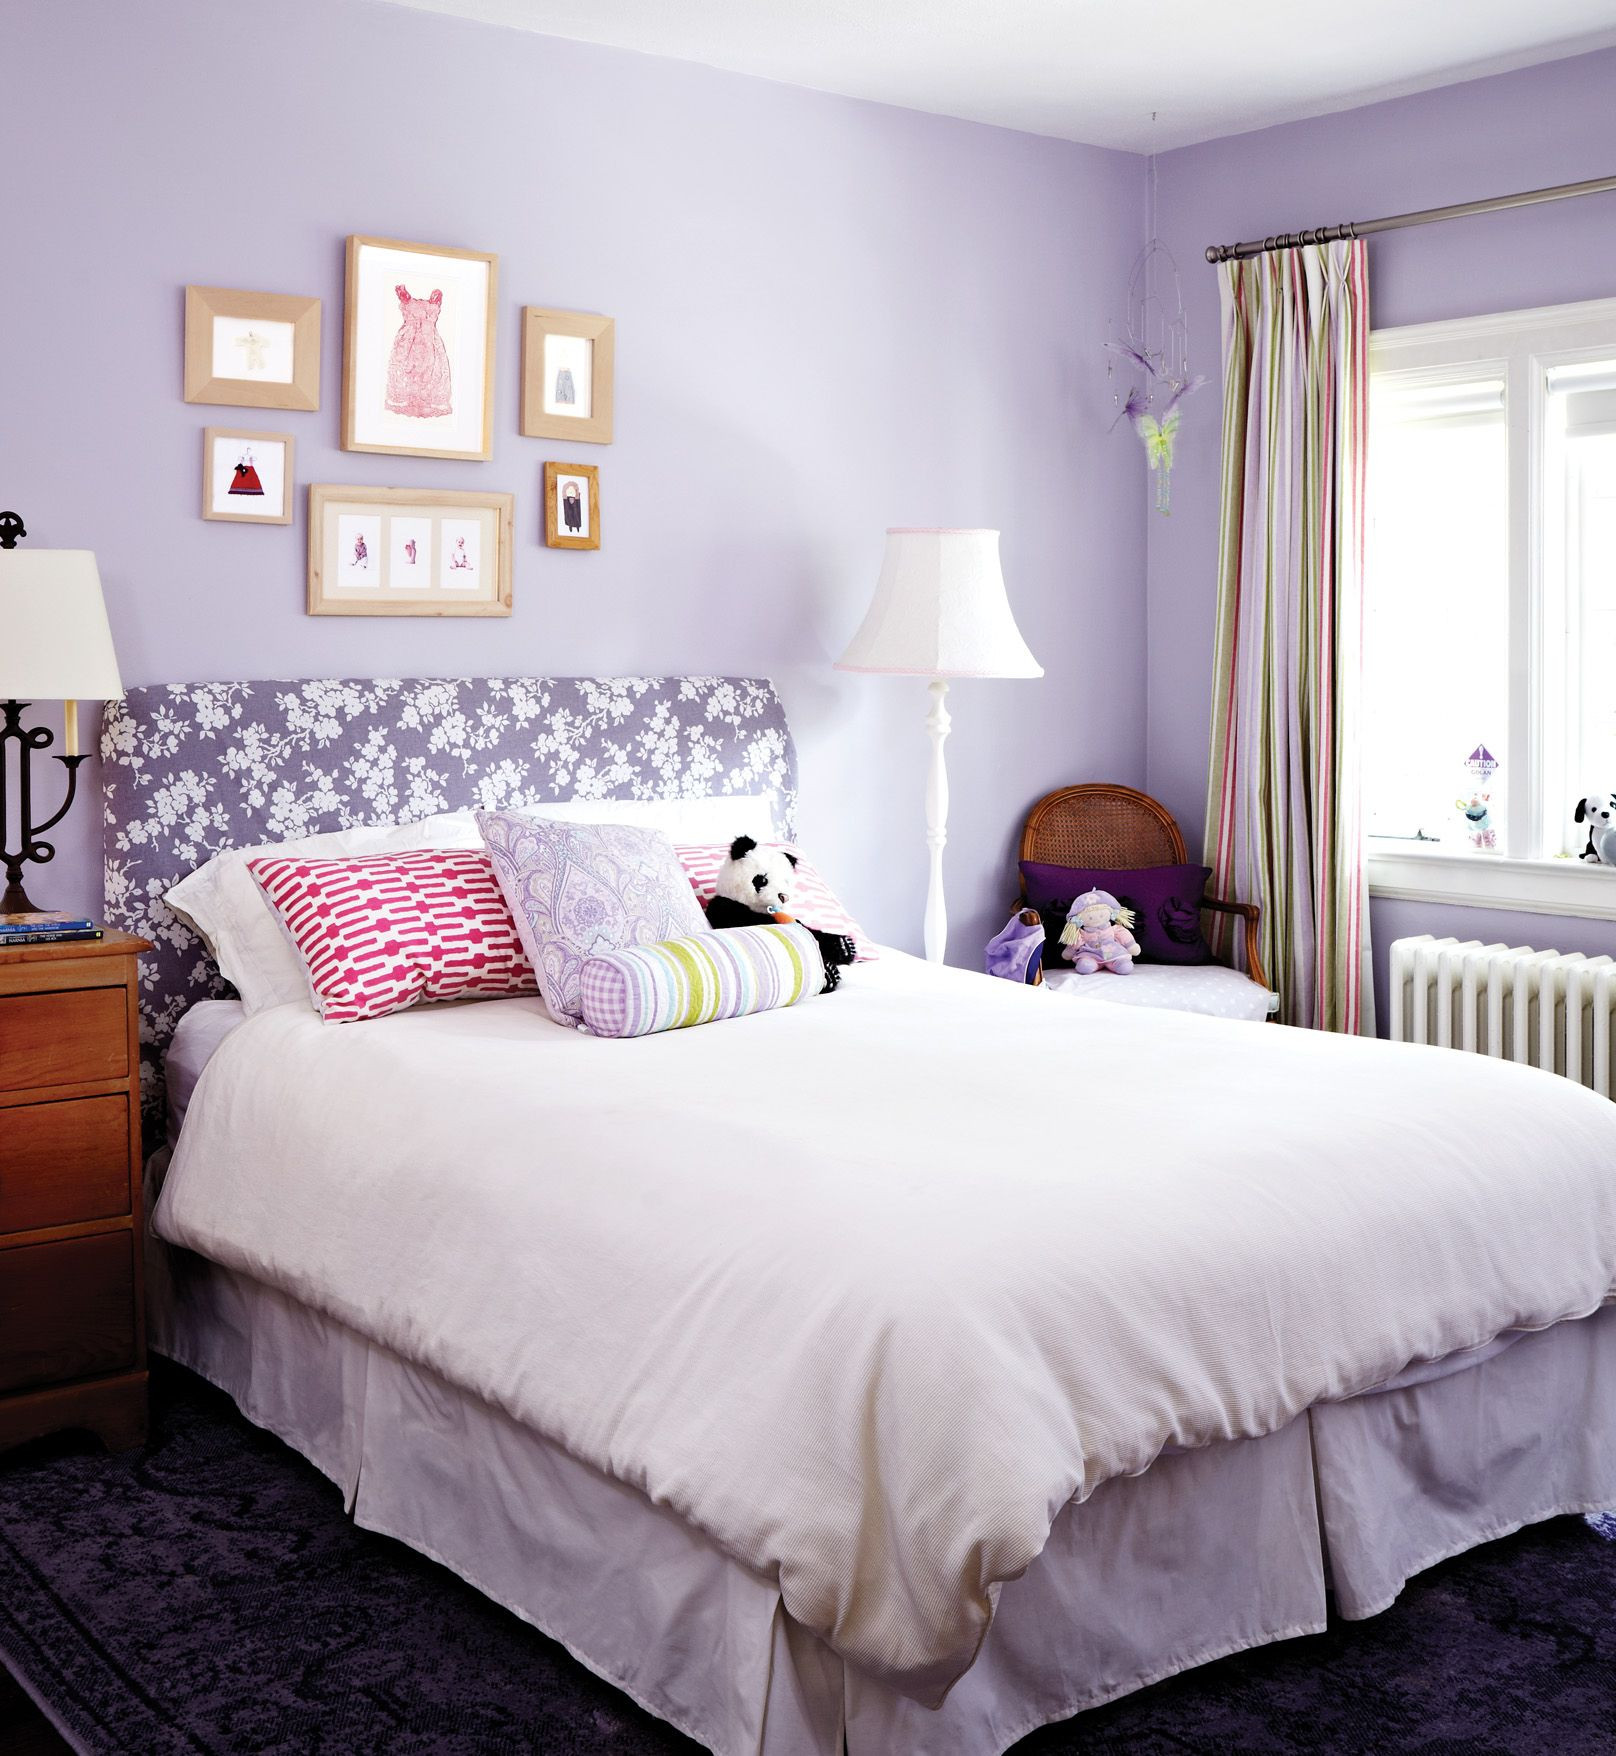 Lavender Paint For Bedroom
 A sure way to design a beautiful bedroom is to stay within